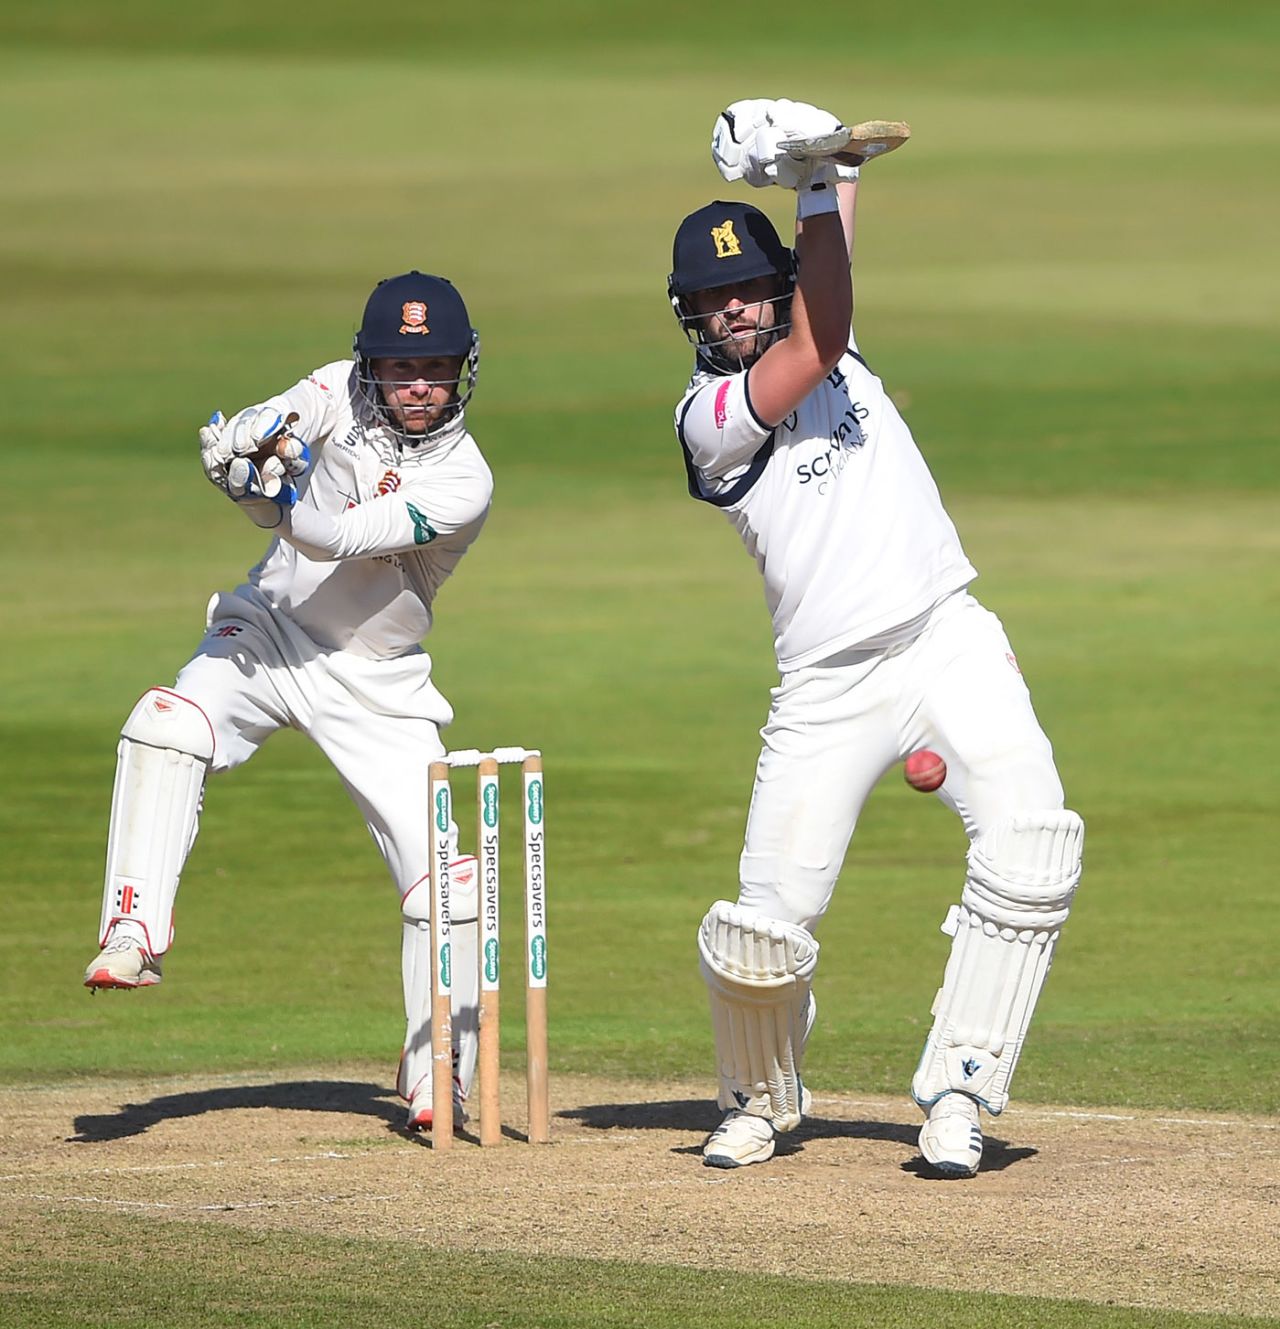 Matthew Lamb drives through the off side, Warwickshire v Essex, Specsavers County Championship, Division One, Edgbaston, 2nd day, September 11, 2019